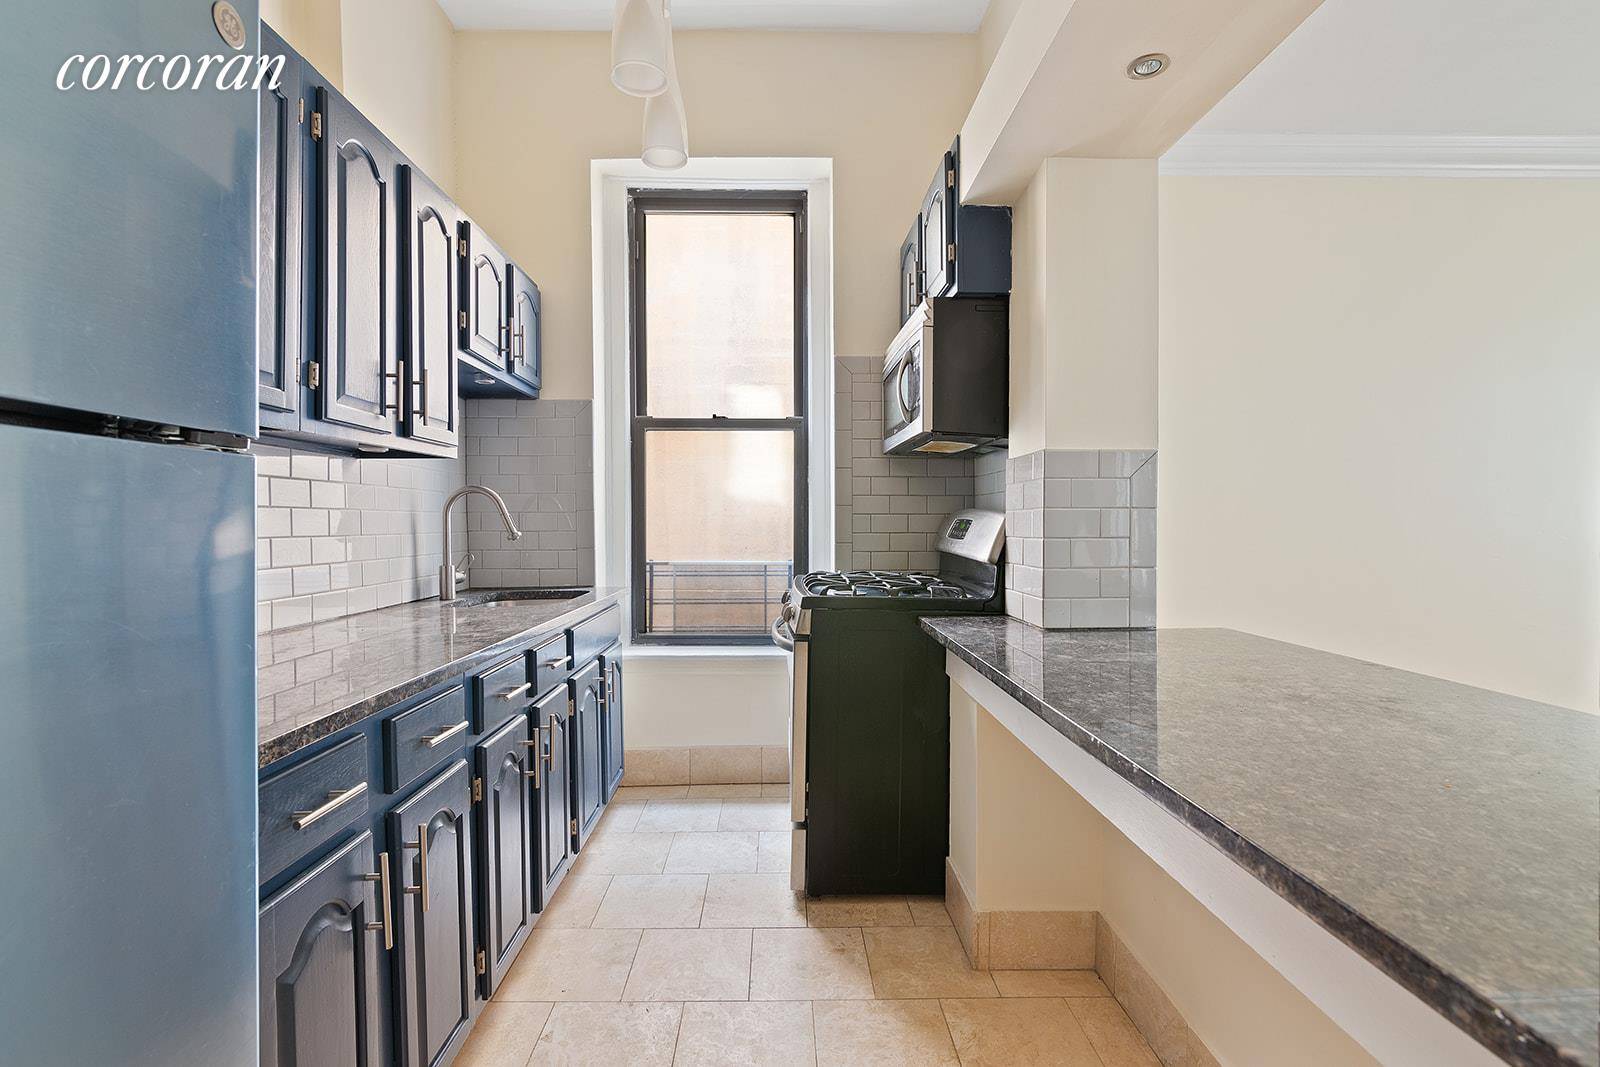 A beautifully renovated, converted two bedroom one block from Riverside Park and the best restaurants in Morningside Heights.